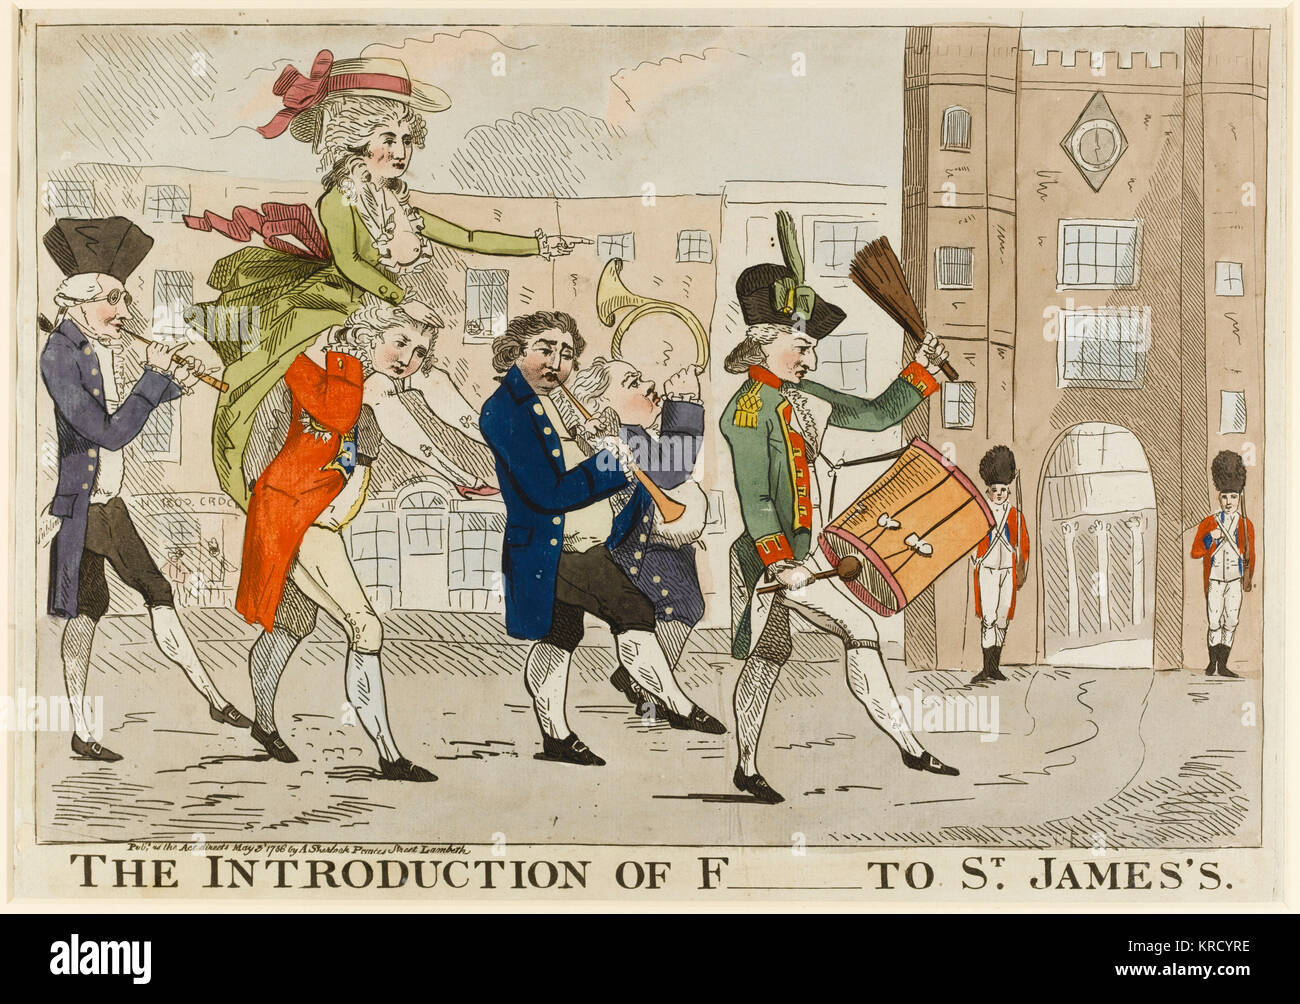 Satirical cartoon, The Introduction of F     to St. James's.  A musical procession led by George Hanger, with Fox, Lord North and Edmund Burke at the back, walks towards the gateway of St. James's Palace.  The Prince of Wales carries on his shoulders a d&#x98ef;llet&#x980d;rs Fitzherbert, who directs him onwards. The Prince is represented as the tool of Mrs Fitzherbert with the Opposition as abettors of their marriage.     Date: 1786 Stock Photo